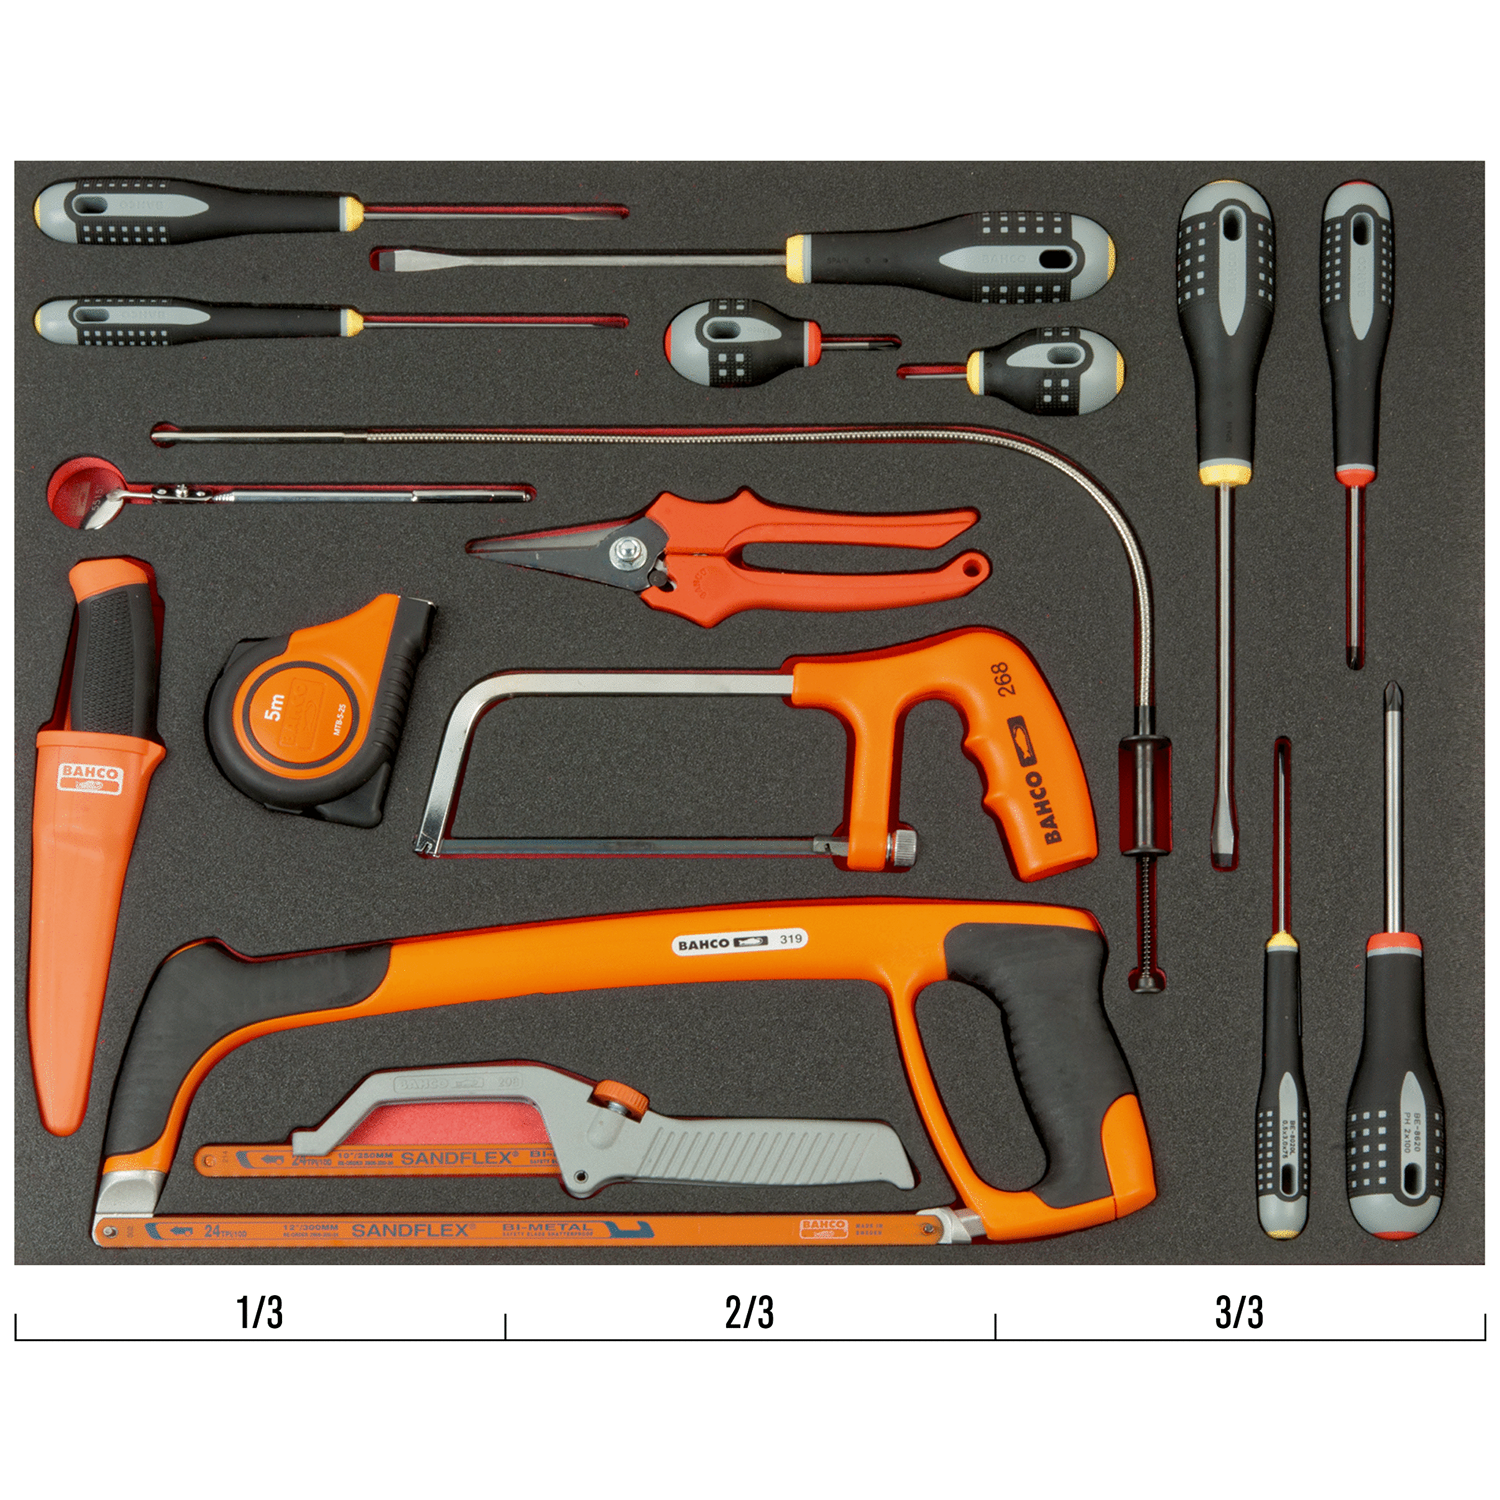 BAHCO FF1A5021 Fit&Go 3/3 Foam Screwdriver and Cutting Tool Set - Premium Screwdriver and Cutting Tool Set from BAHCO - Shop now at Yew Aik.